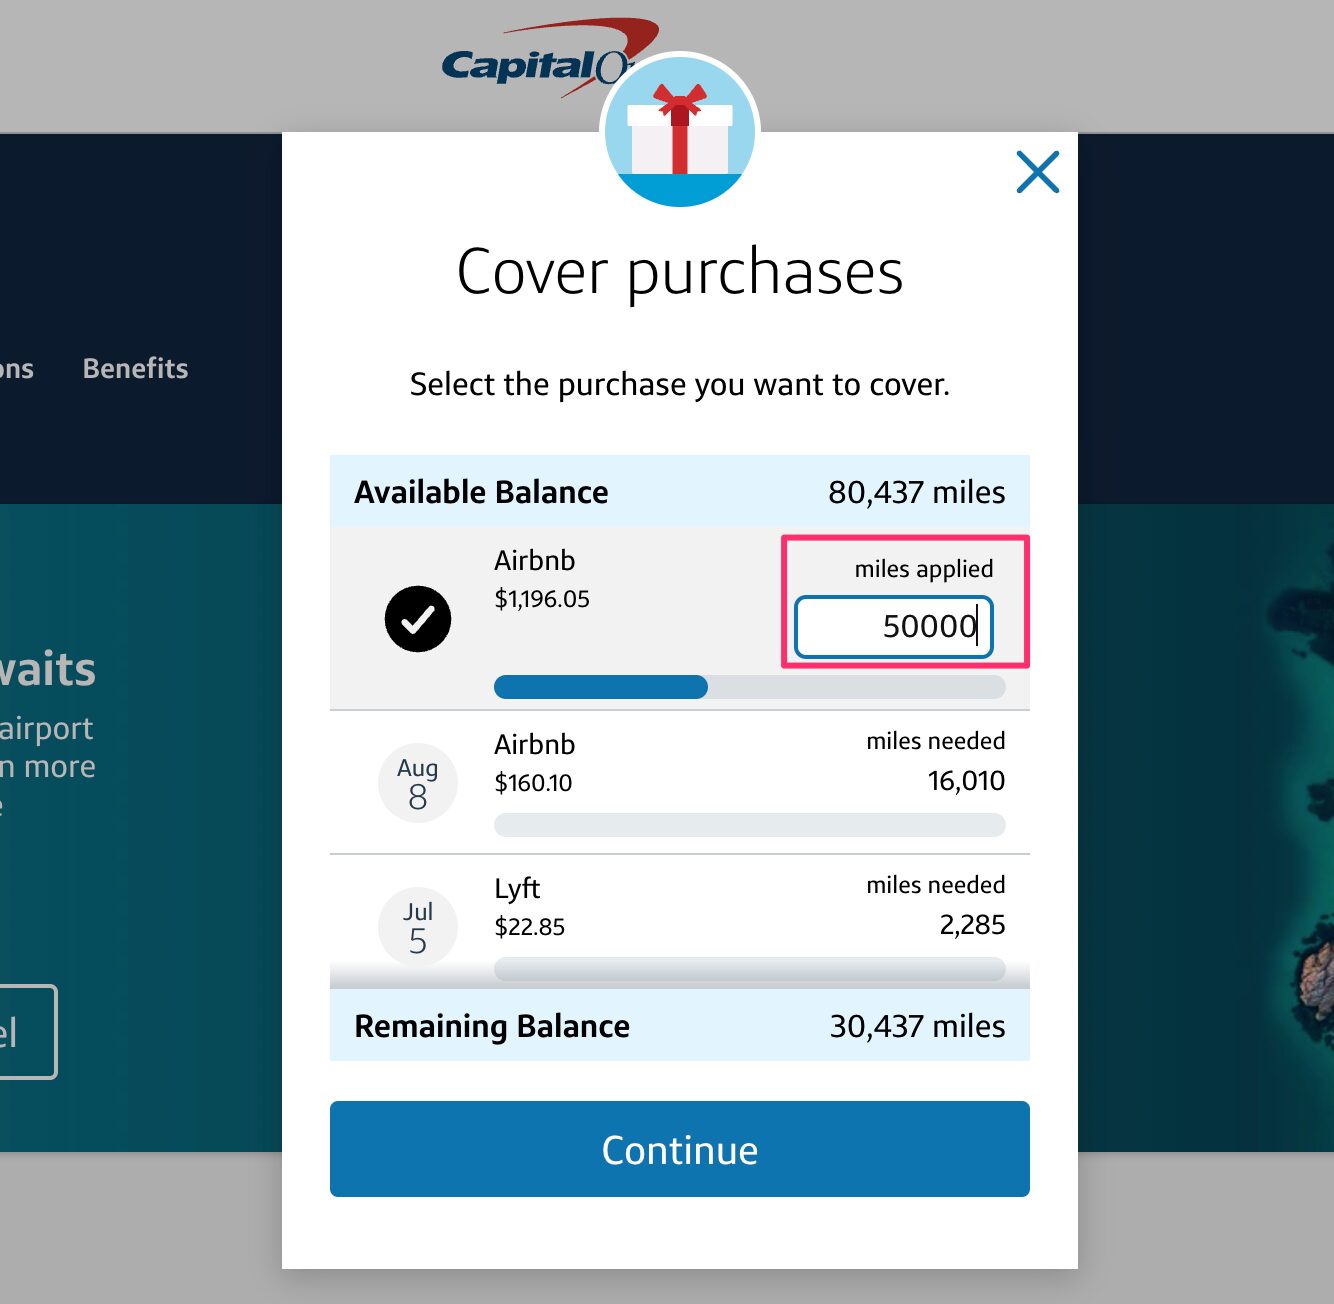 Capital One Miles for Airbnb stays